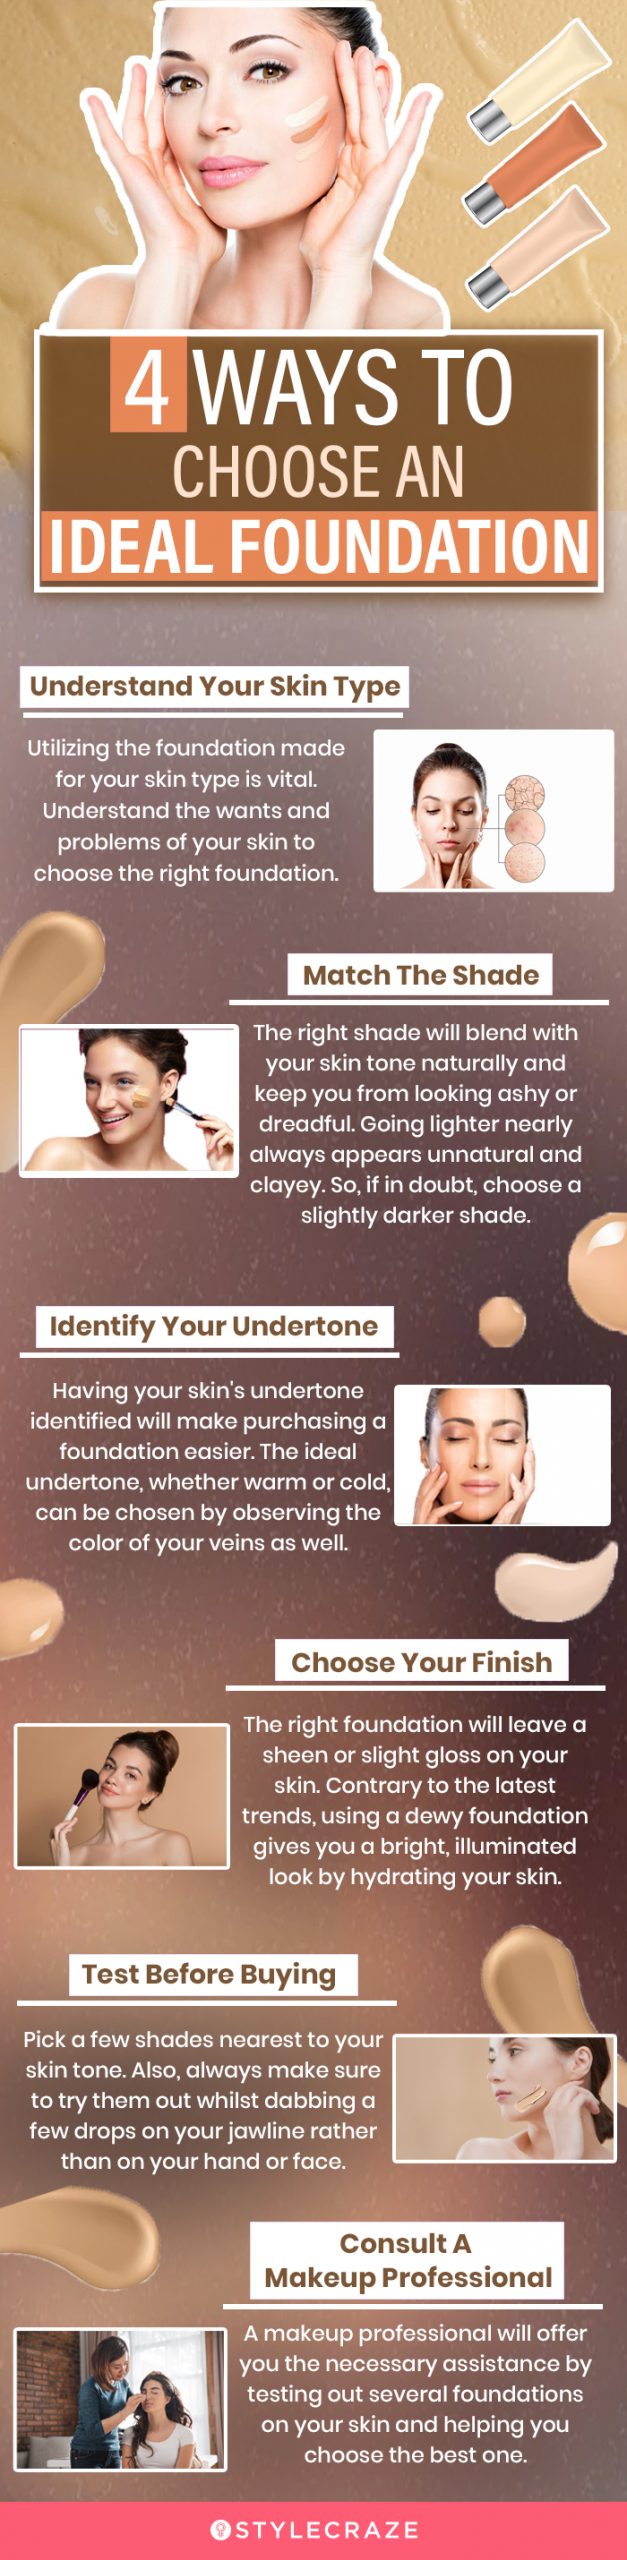 4 ways to choose an ideal foundation [infographic]